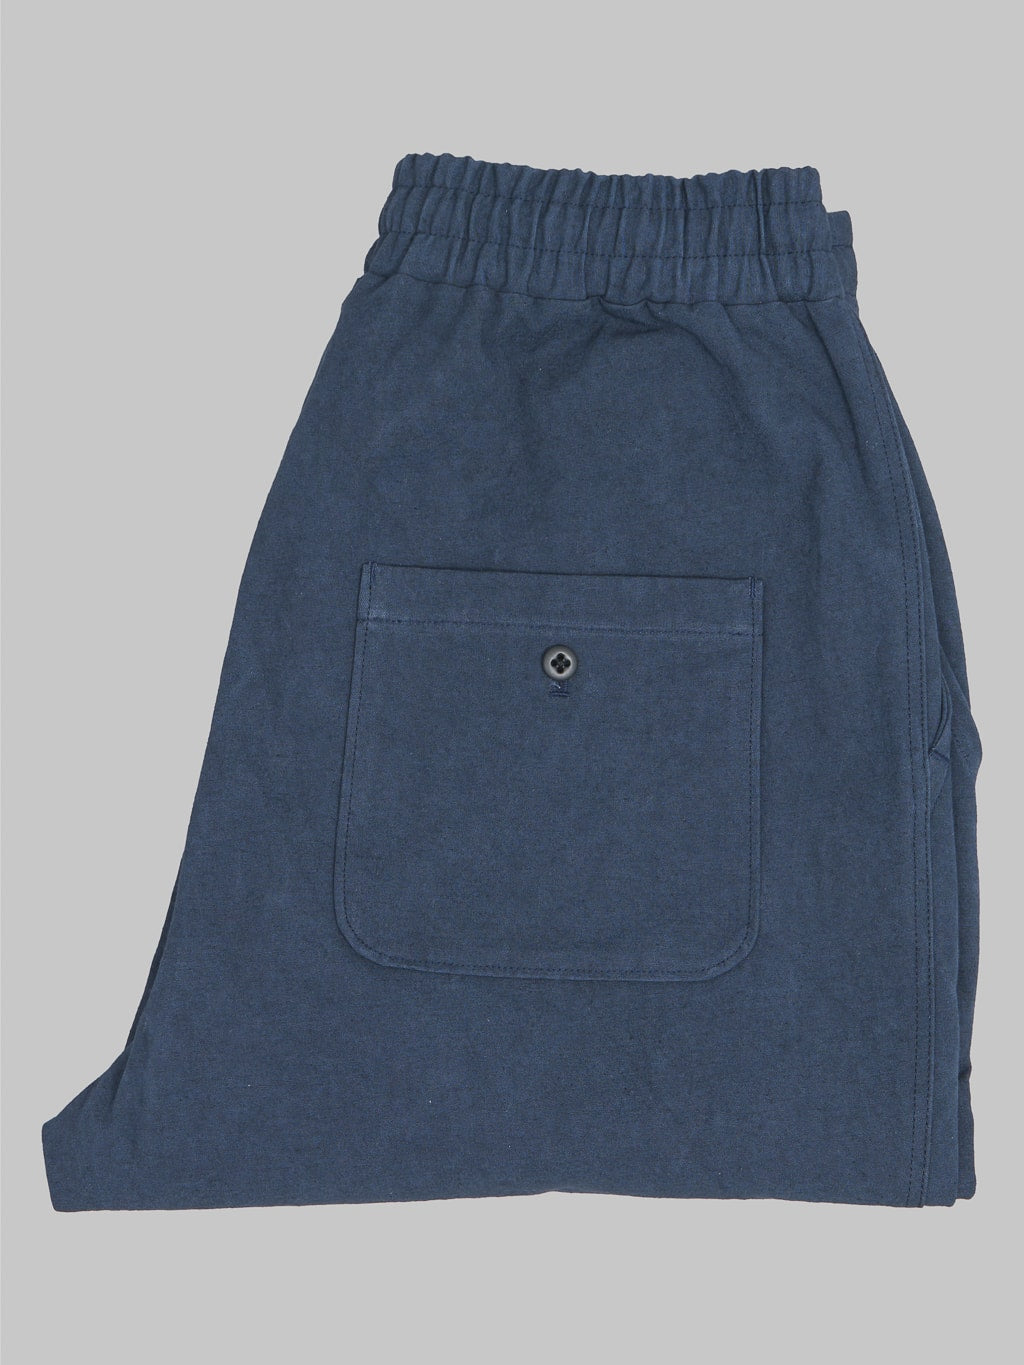 Jackman Canvas Rookie Pants Navy sulfur dyed fabric